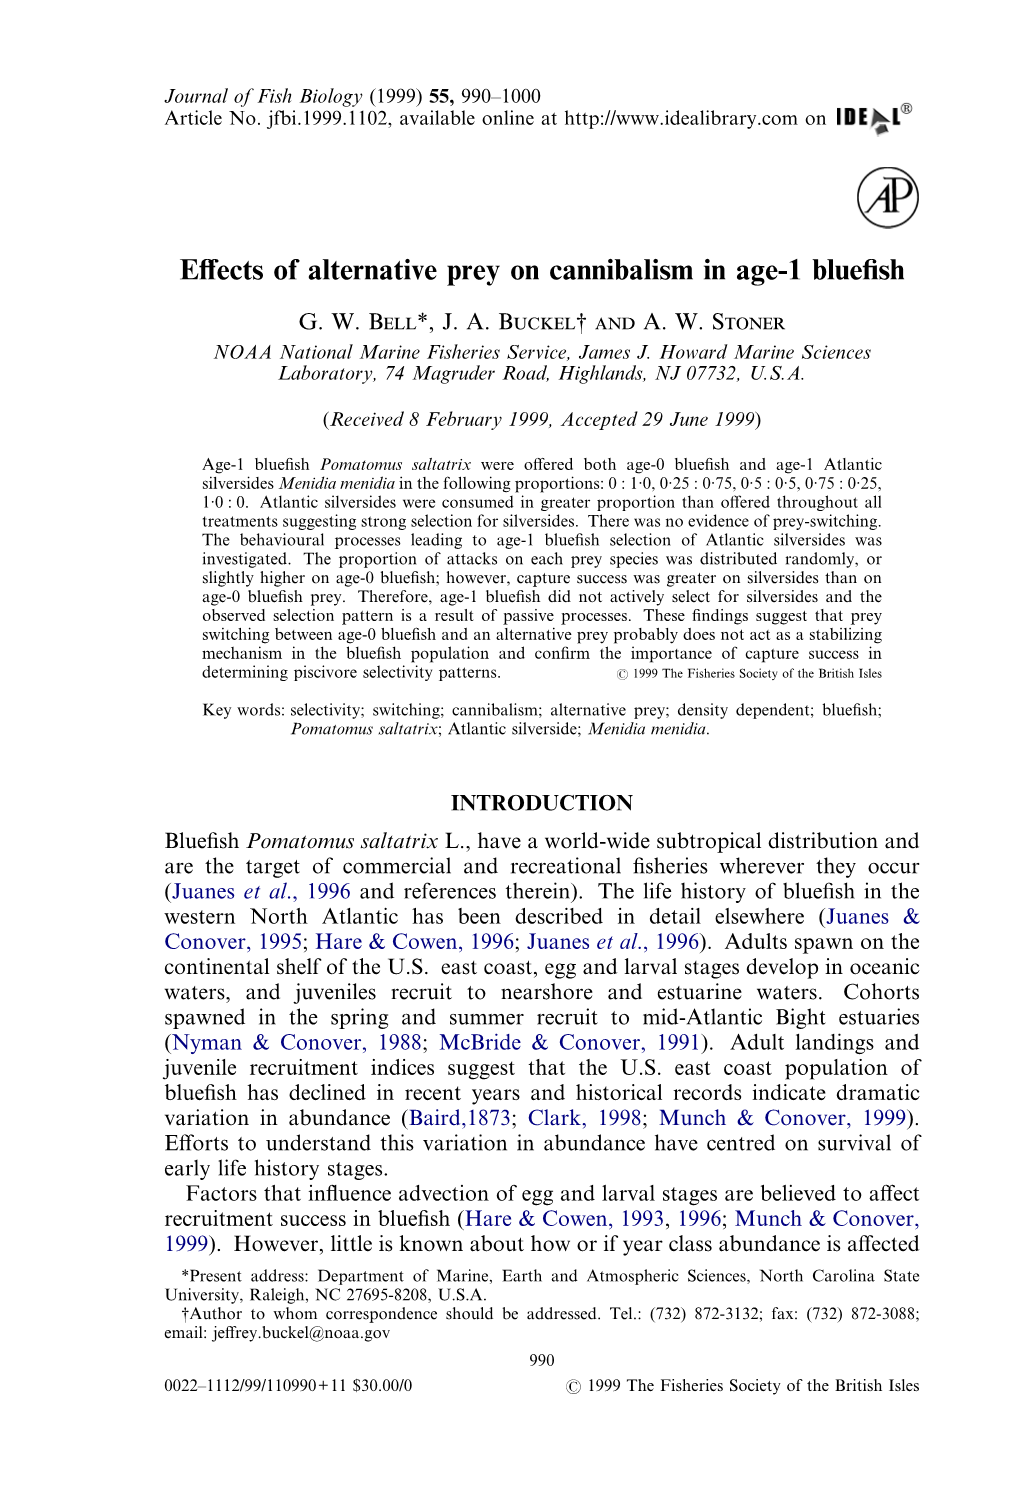 Effects of Alternative Prey on Cannibalism in Age-1 Bluefish